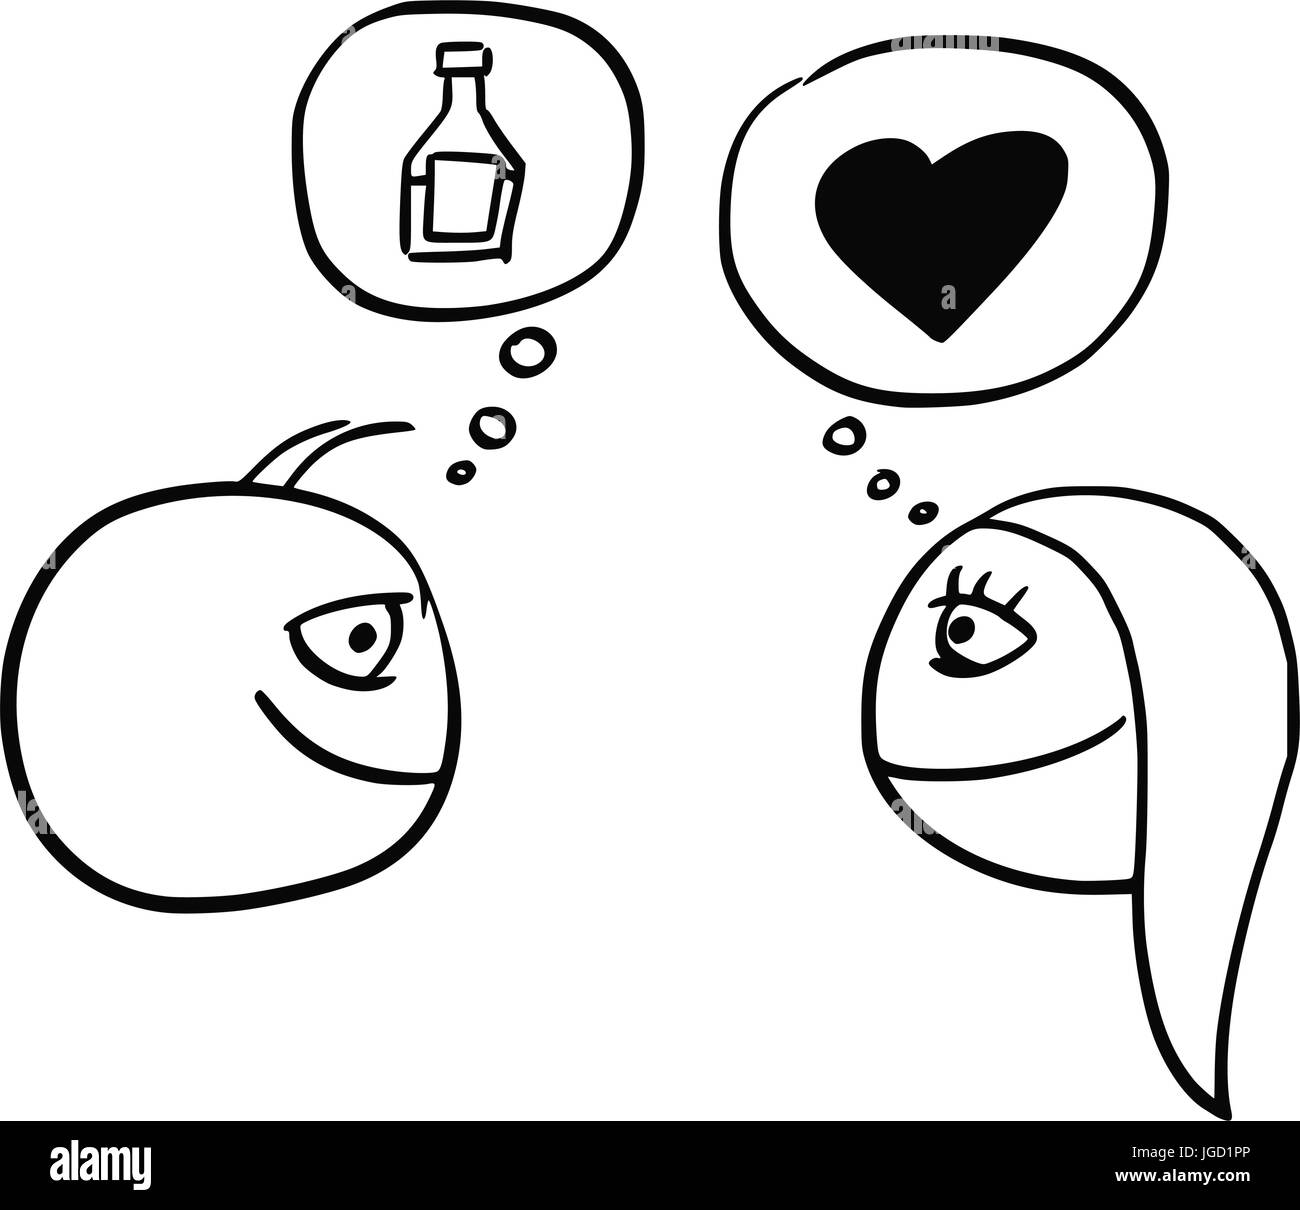 Cartoon vector of difference between man and woman thinking about drink bottle flask and heart symbol of love and relationship Stock Vector